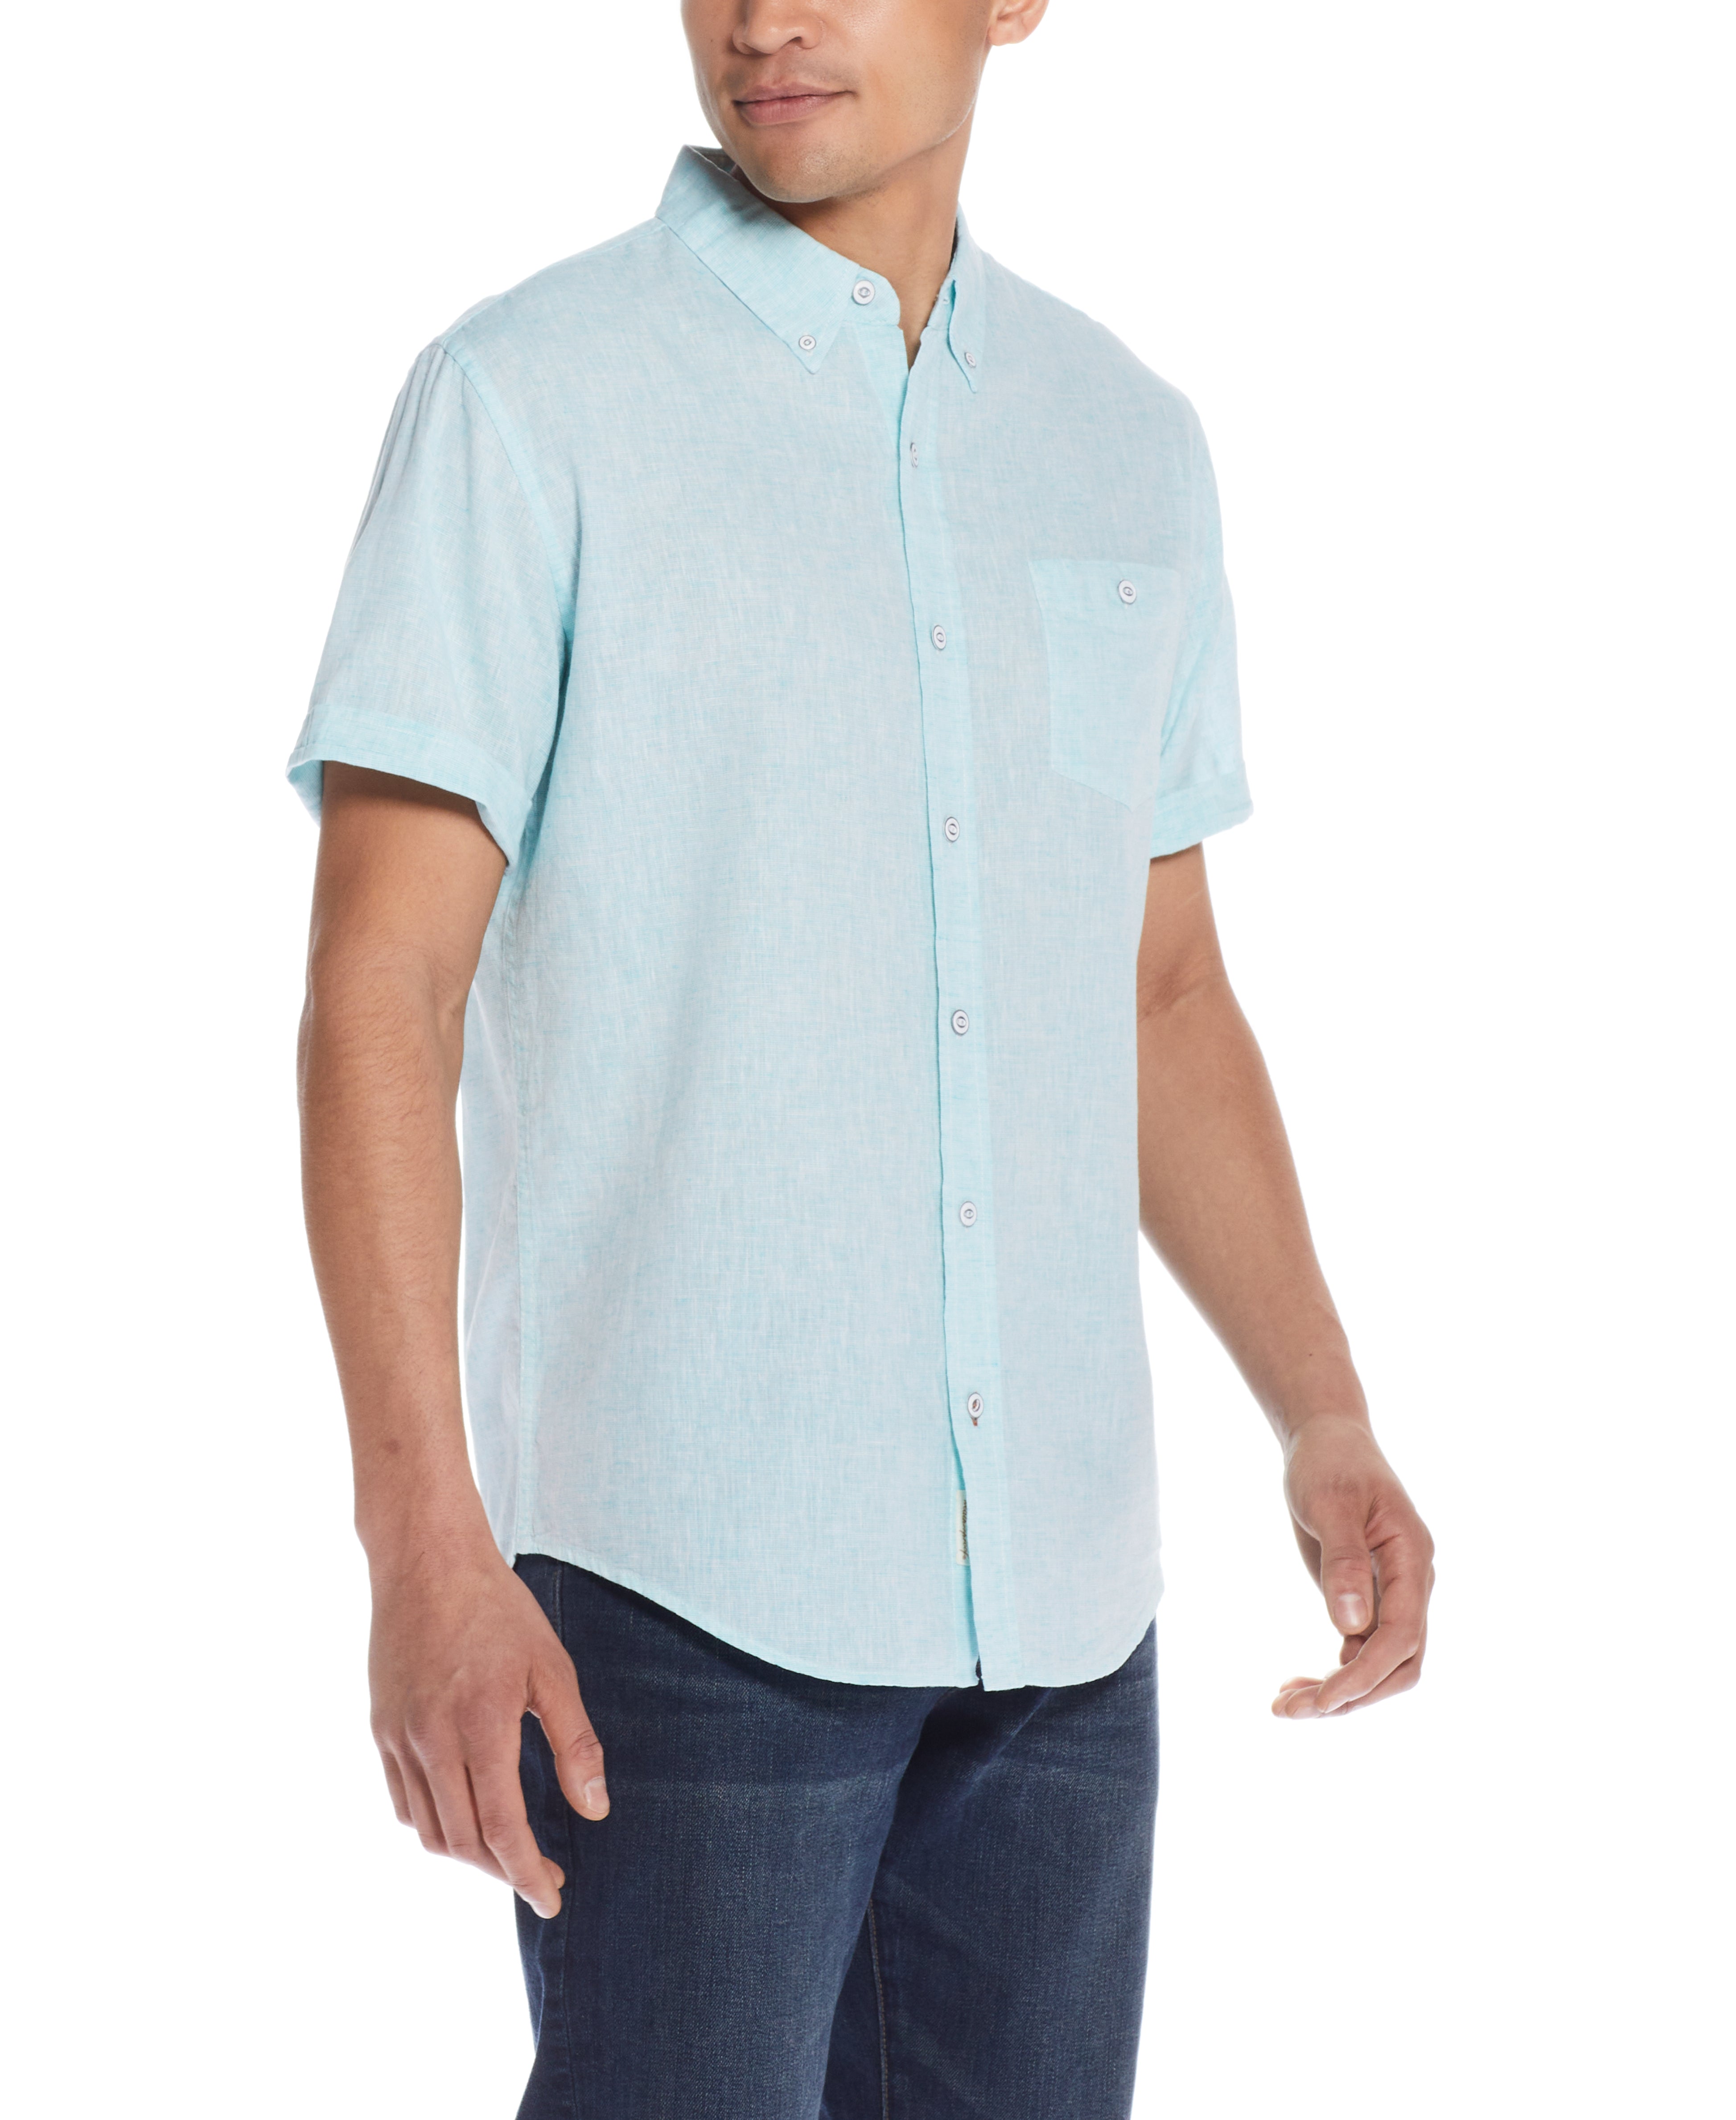 SHORT SLEEVE SOLID LINEN COTTON in MINT